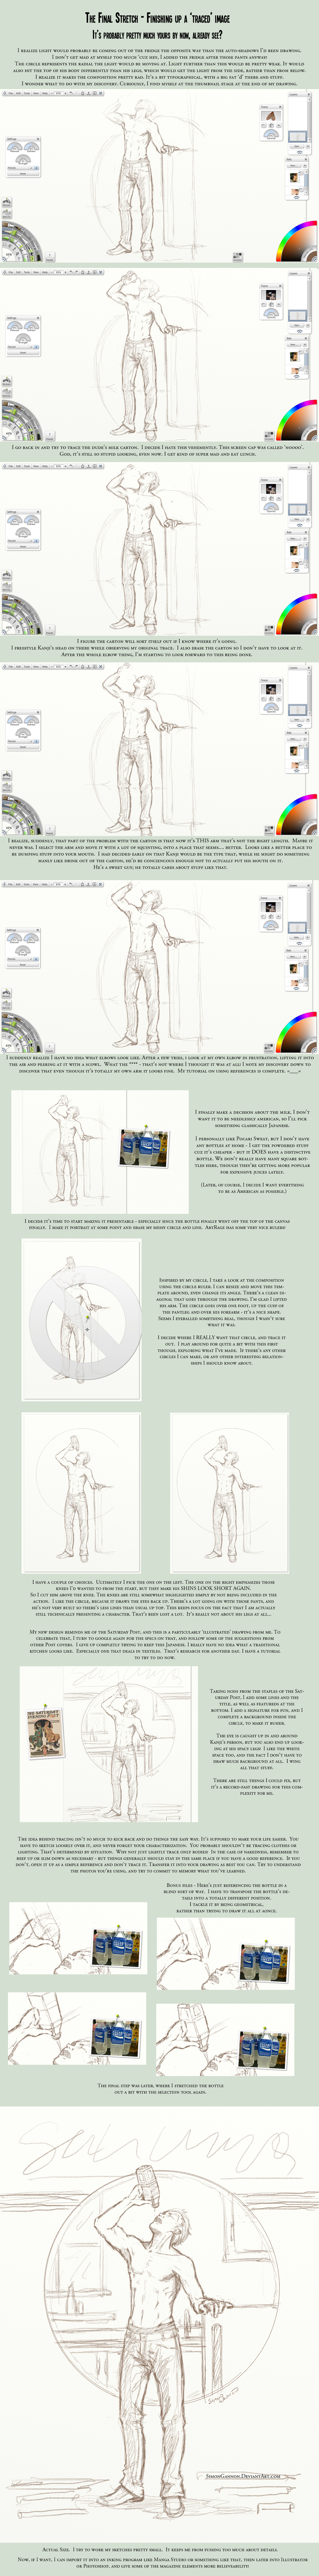 Tracing Tutorial and Process - Part III